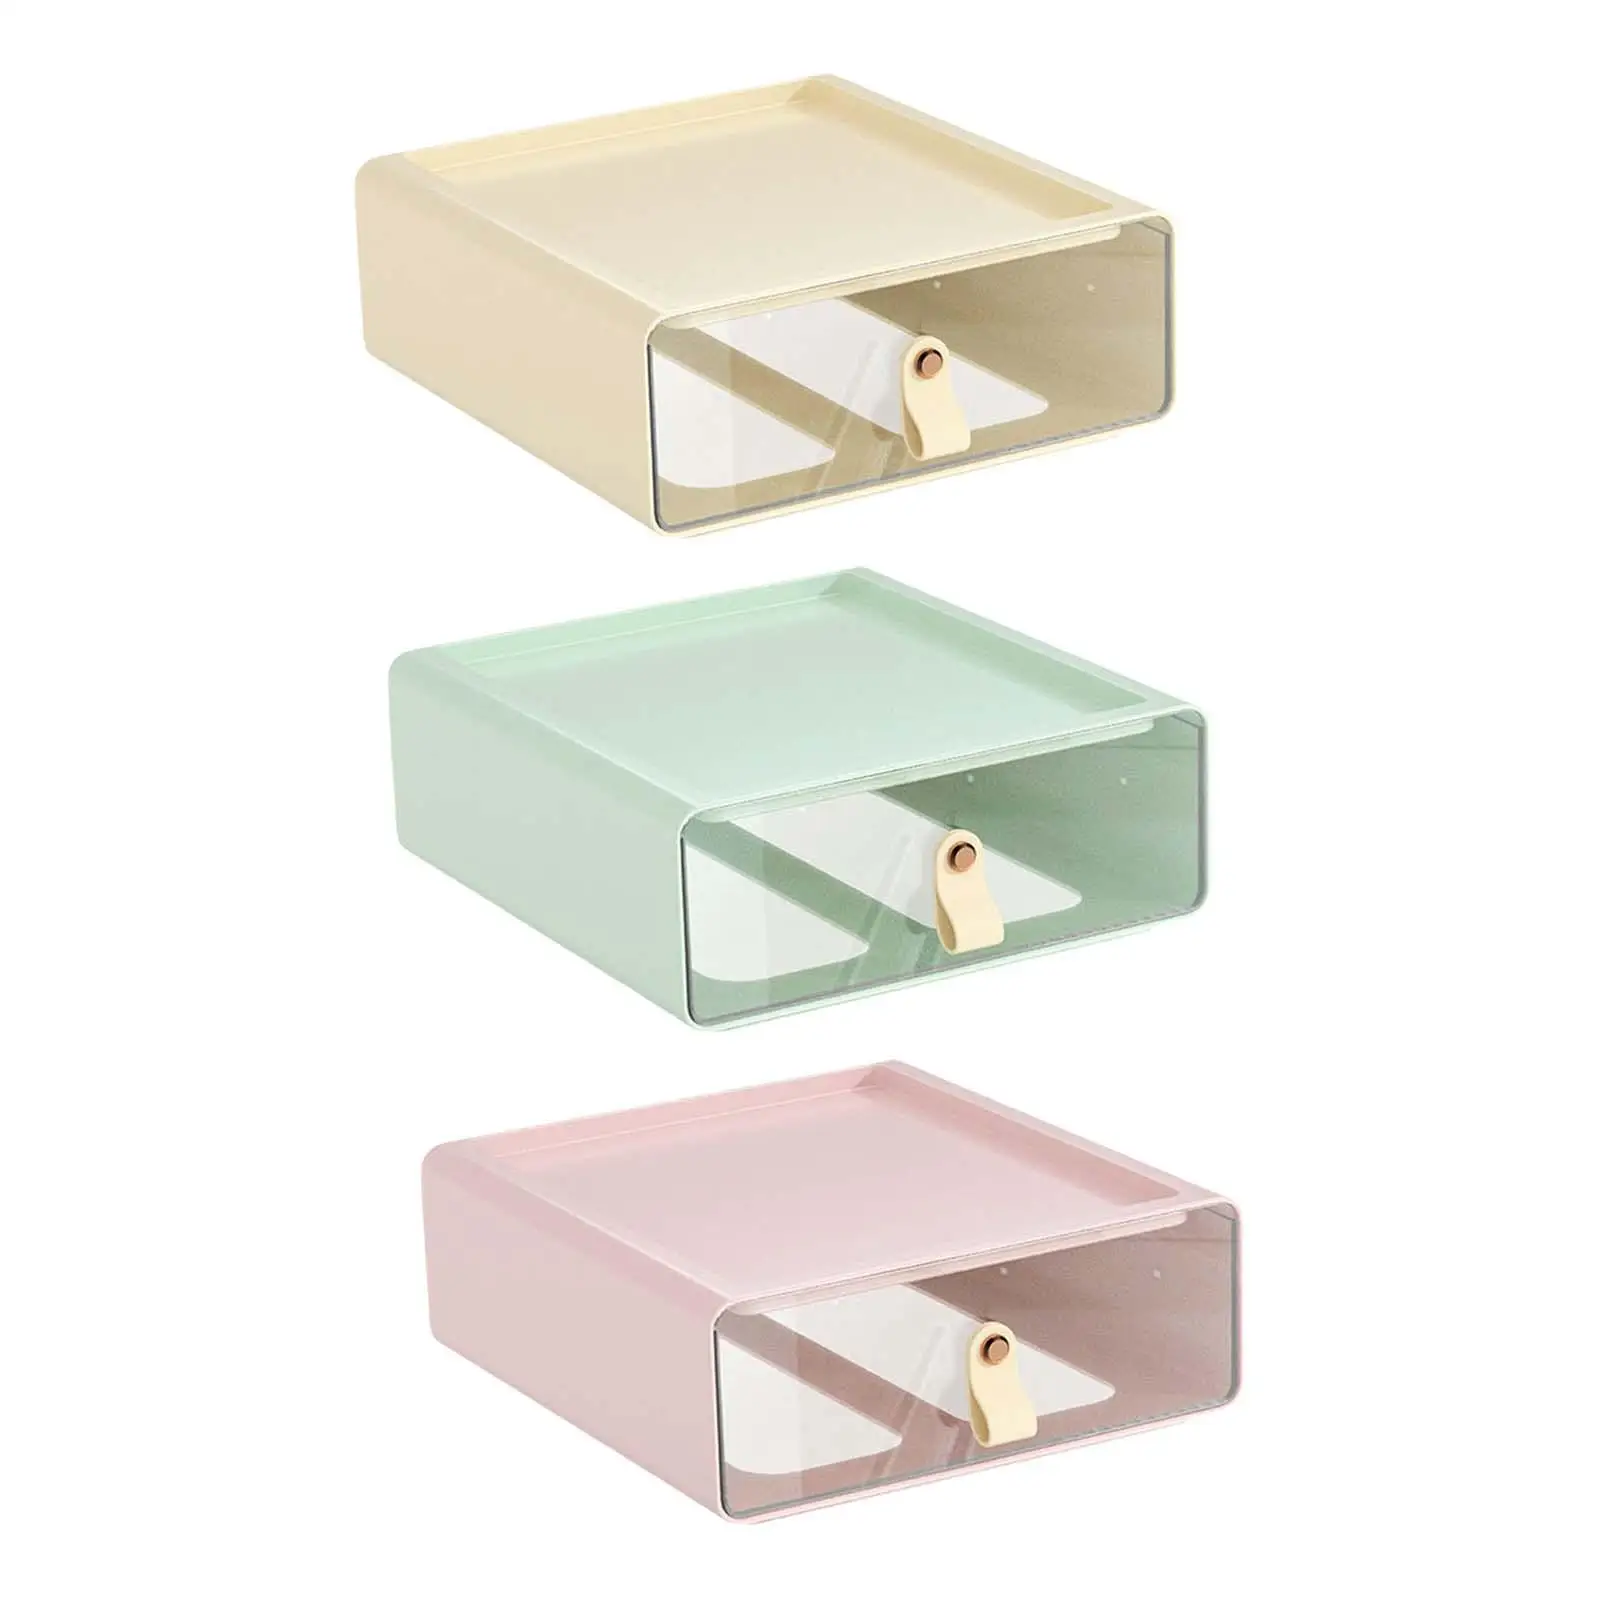 Desk Organizer Drawer Portable Multifunctional Large Capacity Accessories Desktop Stationery Organizer for Office Home Bathroom